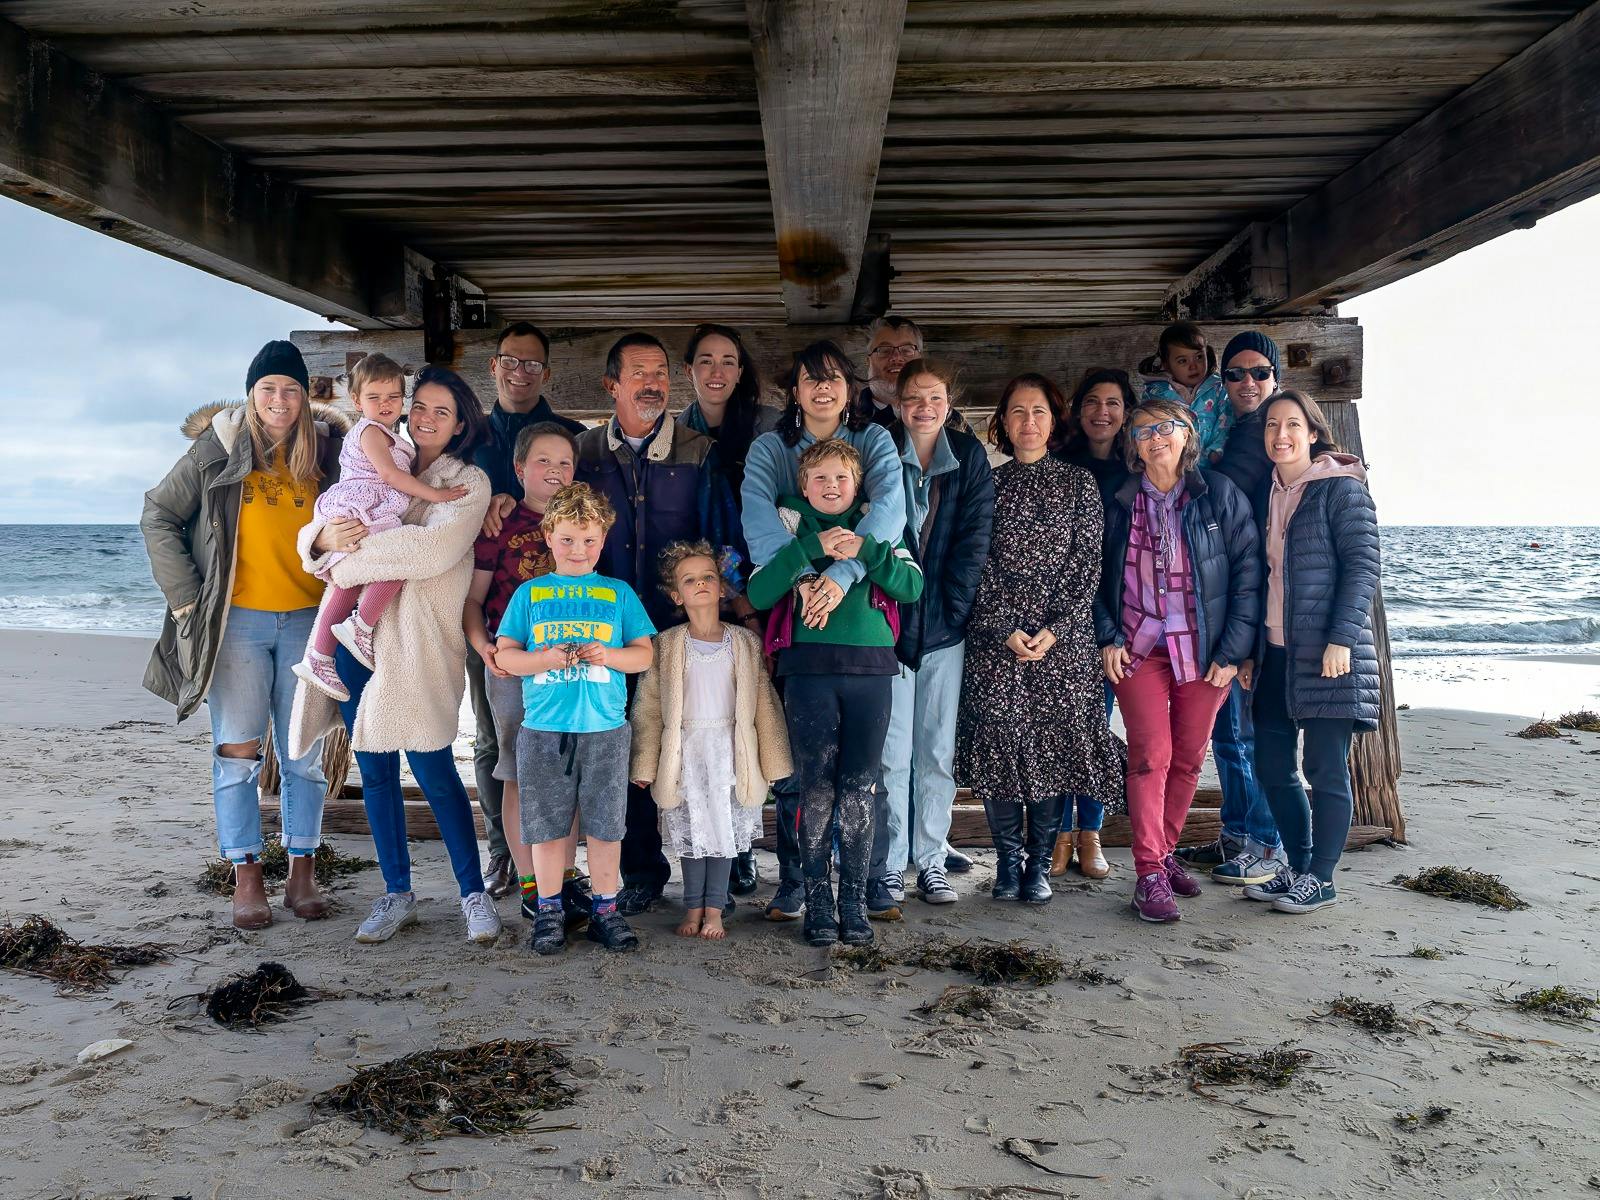 Family under the Jetty - Normanville Jetty is a great spot for family photos